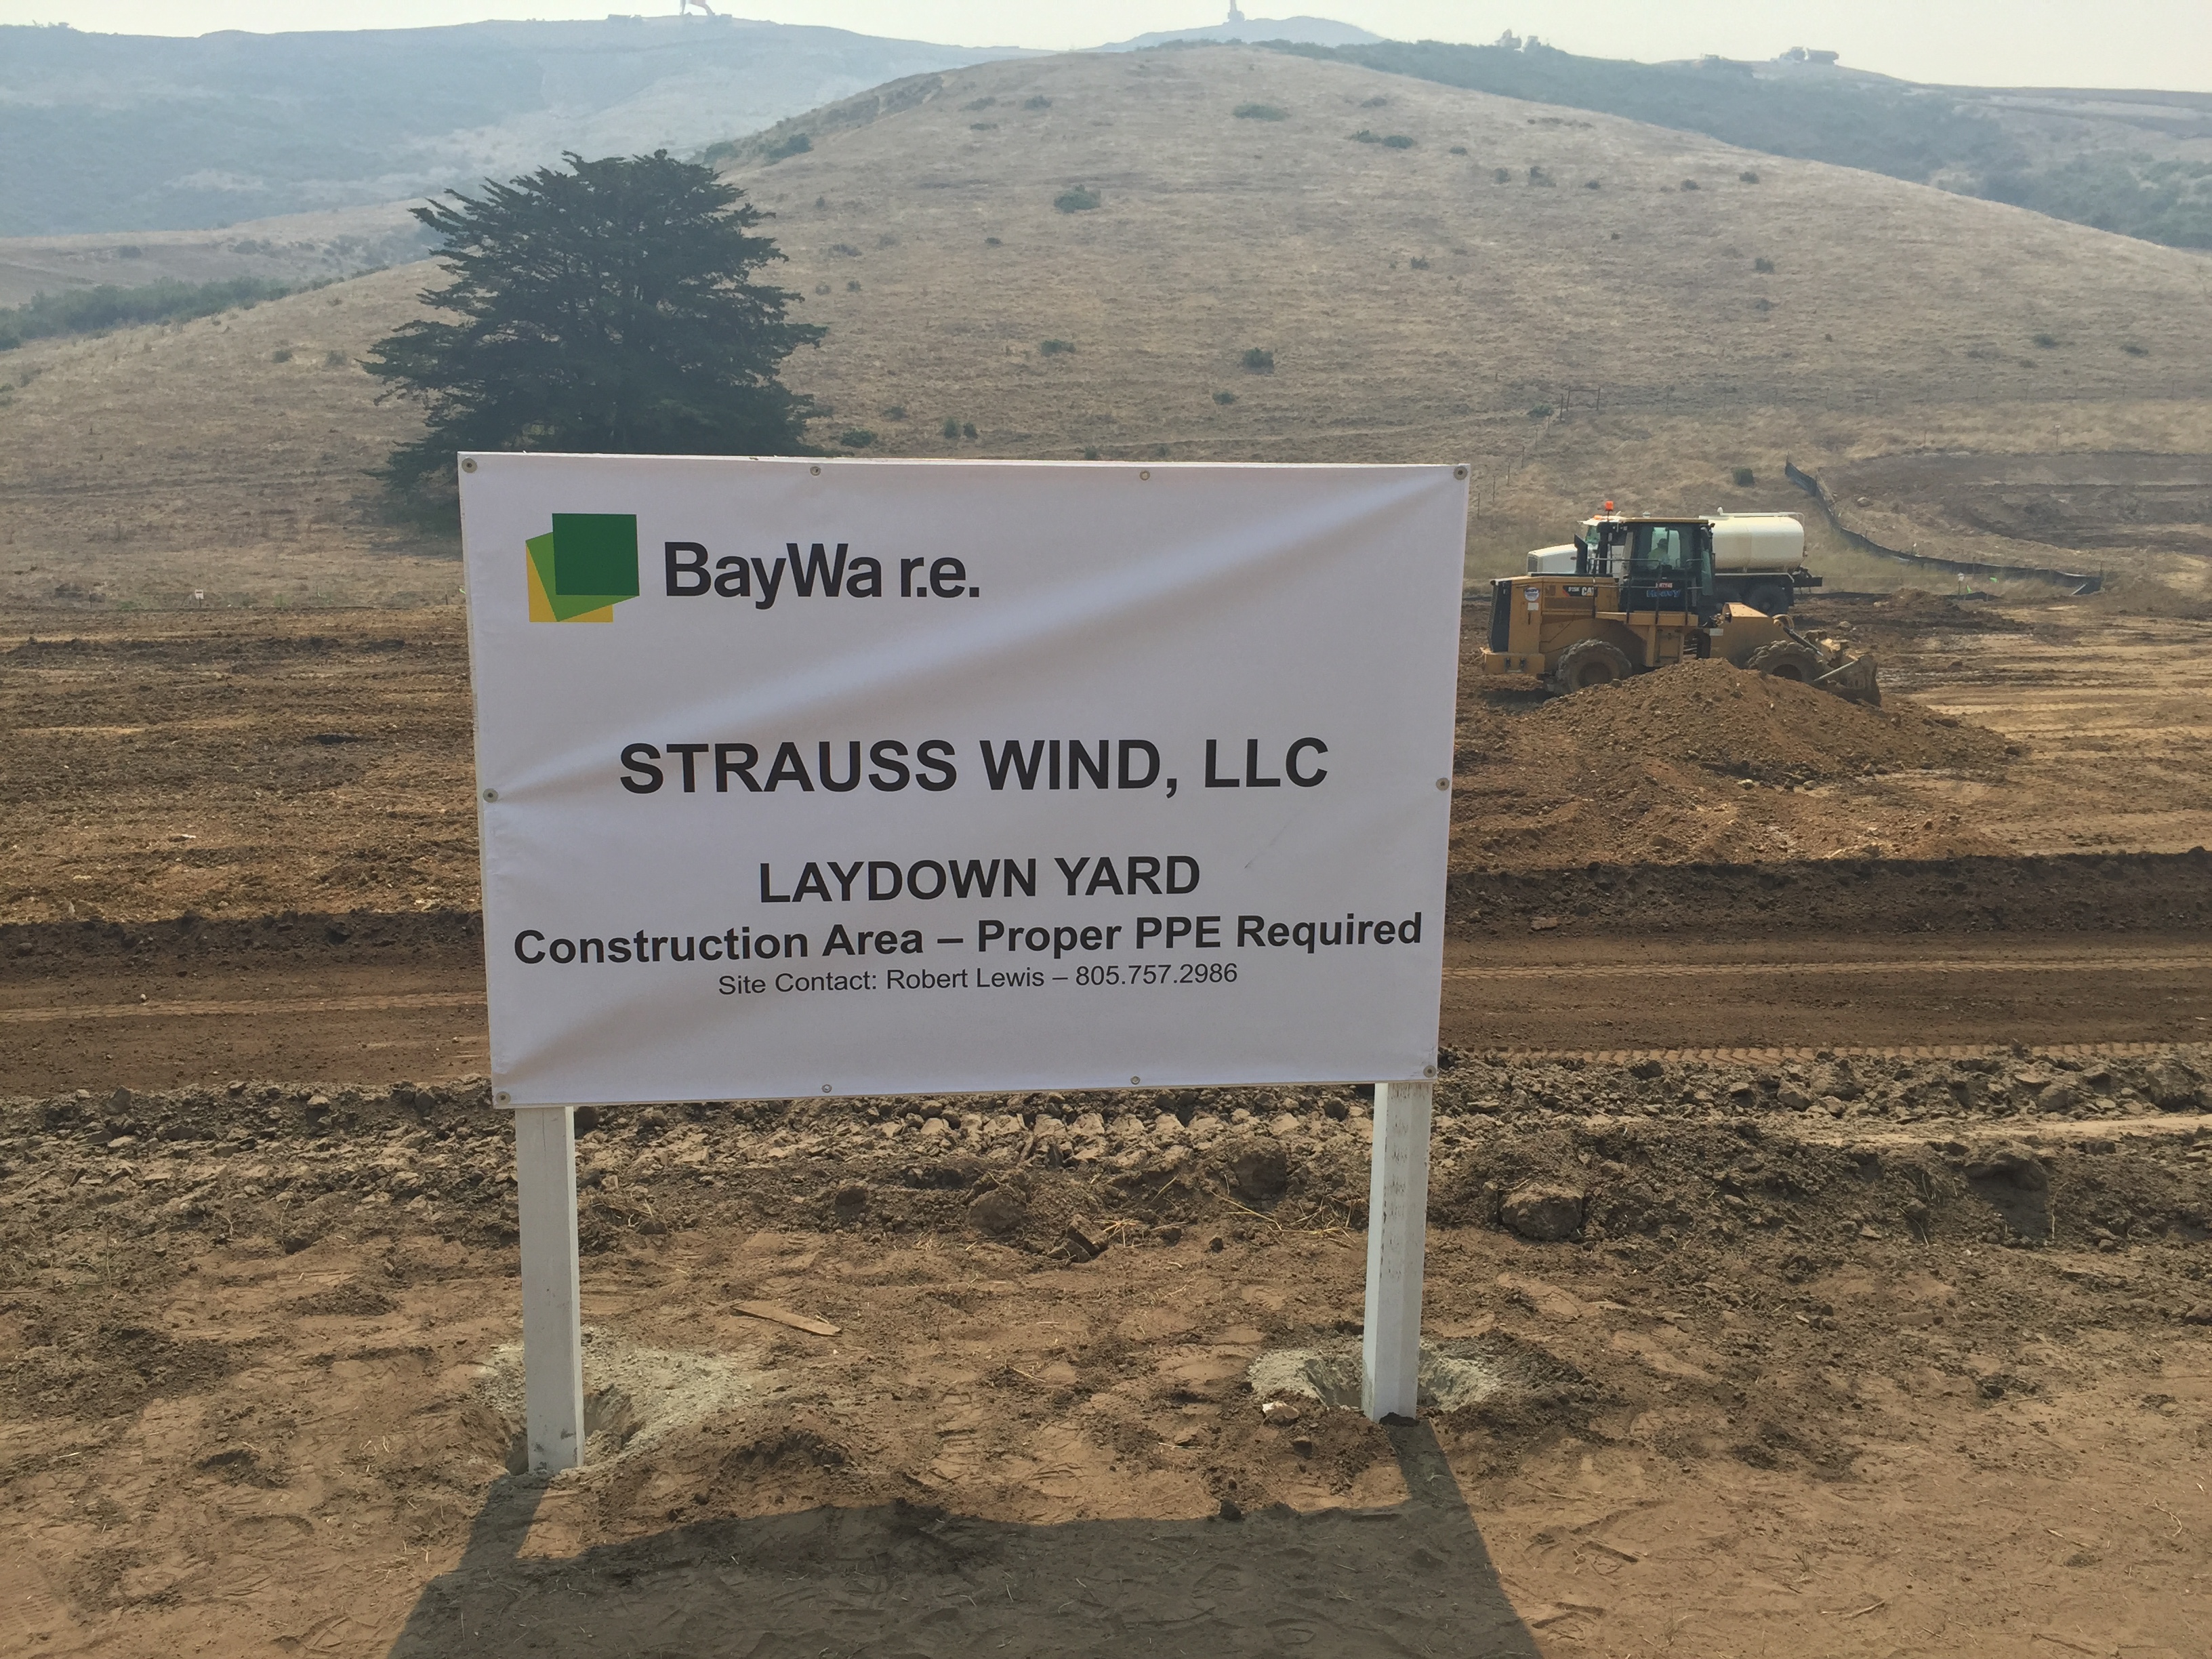 It’s happening right here in Santa Barbara’s County! While oil is shrinking, the Strauss Wind Project has broken ground in the Lompoc area to afford us clean renewable energy. It is designed to generate enough power for 45,000 homes, generate $40 million in taxes over 30 years and reduce up to 200,000 metric tons of CO2 annually. (Photo courtesy of developer BayWar.e Wind LLC)